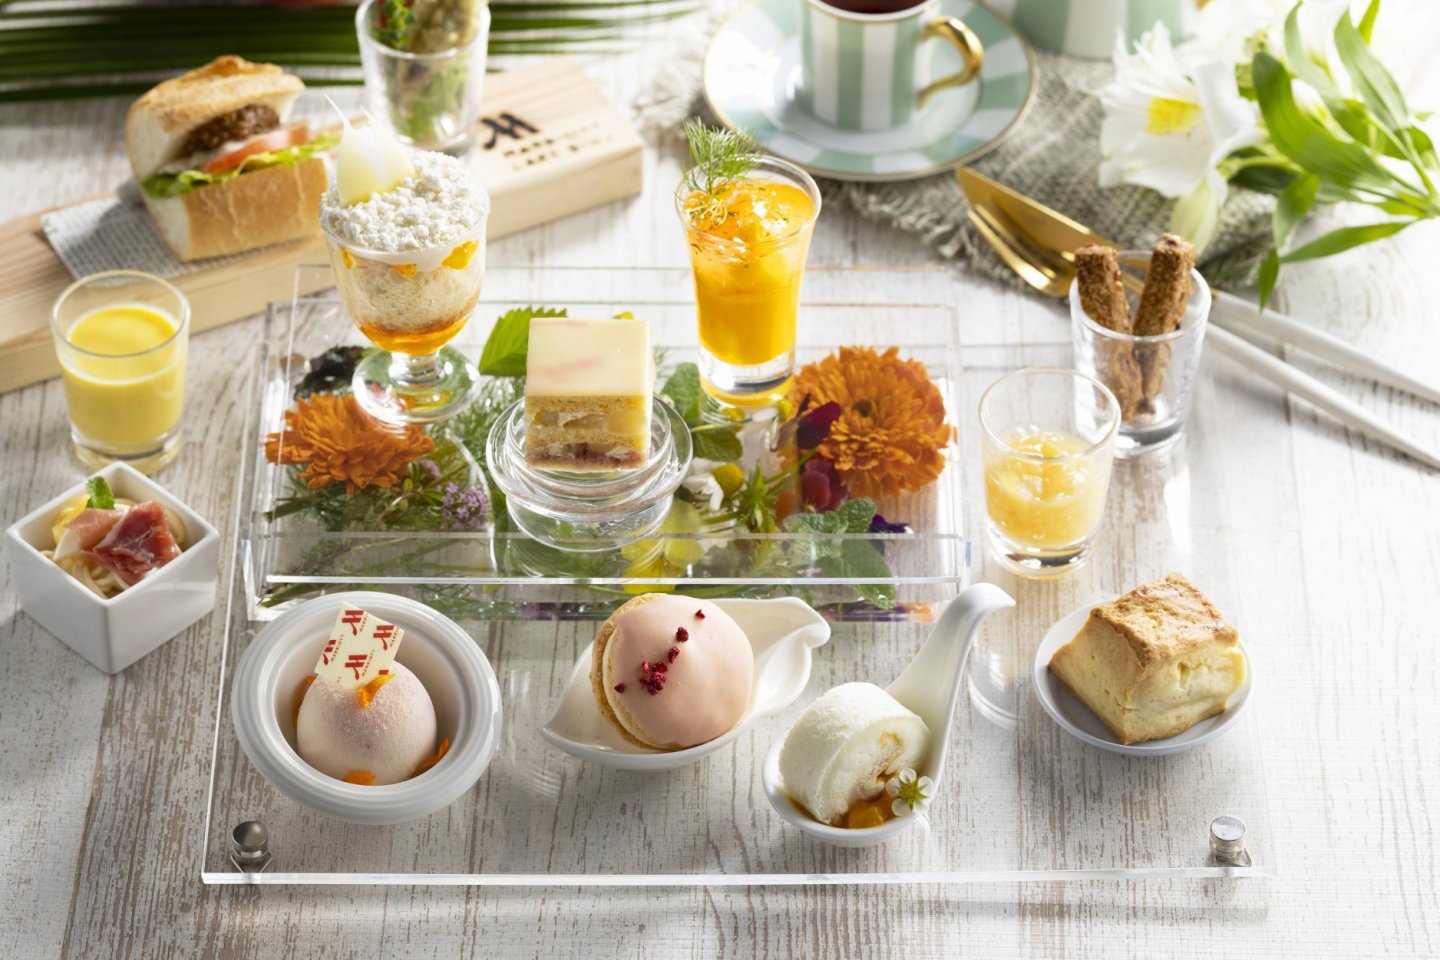 The afternoon tea menu incorporates the taste of summer via peach and mango dishes